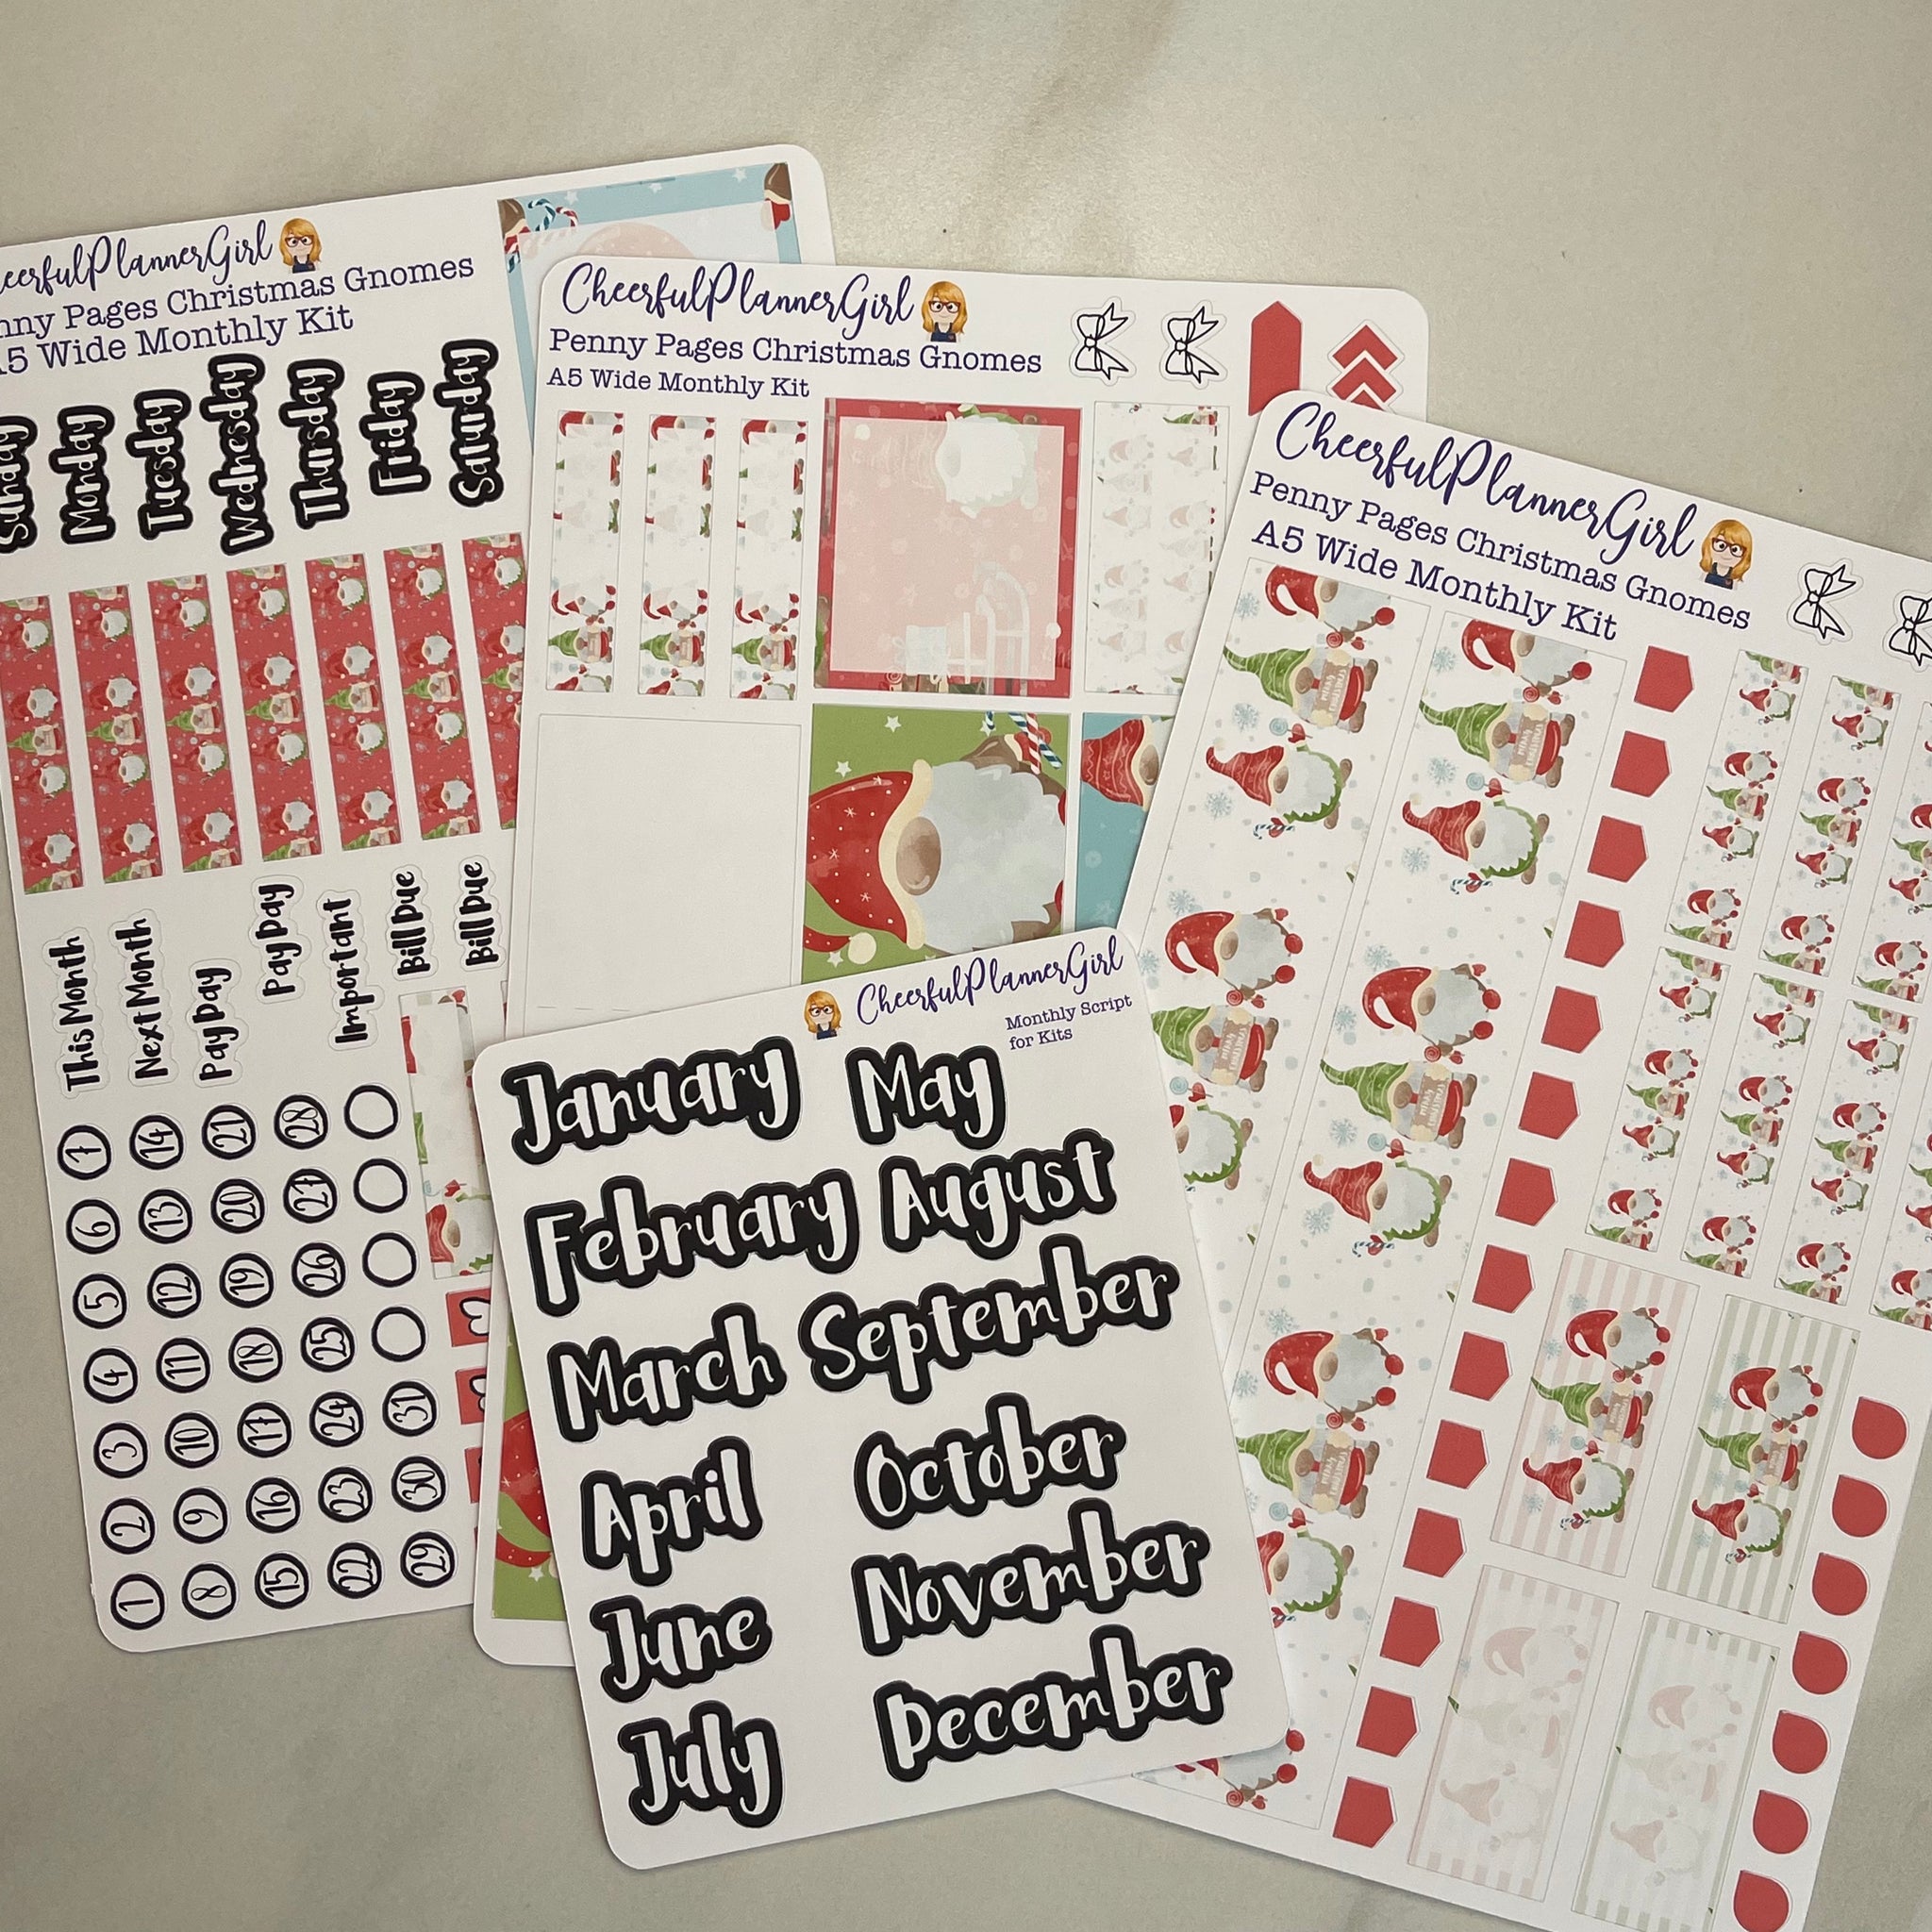 Christmas Gnomes Monthly Layout Kit for Penny Pages A5 Wide Planners